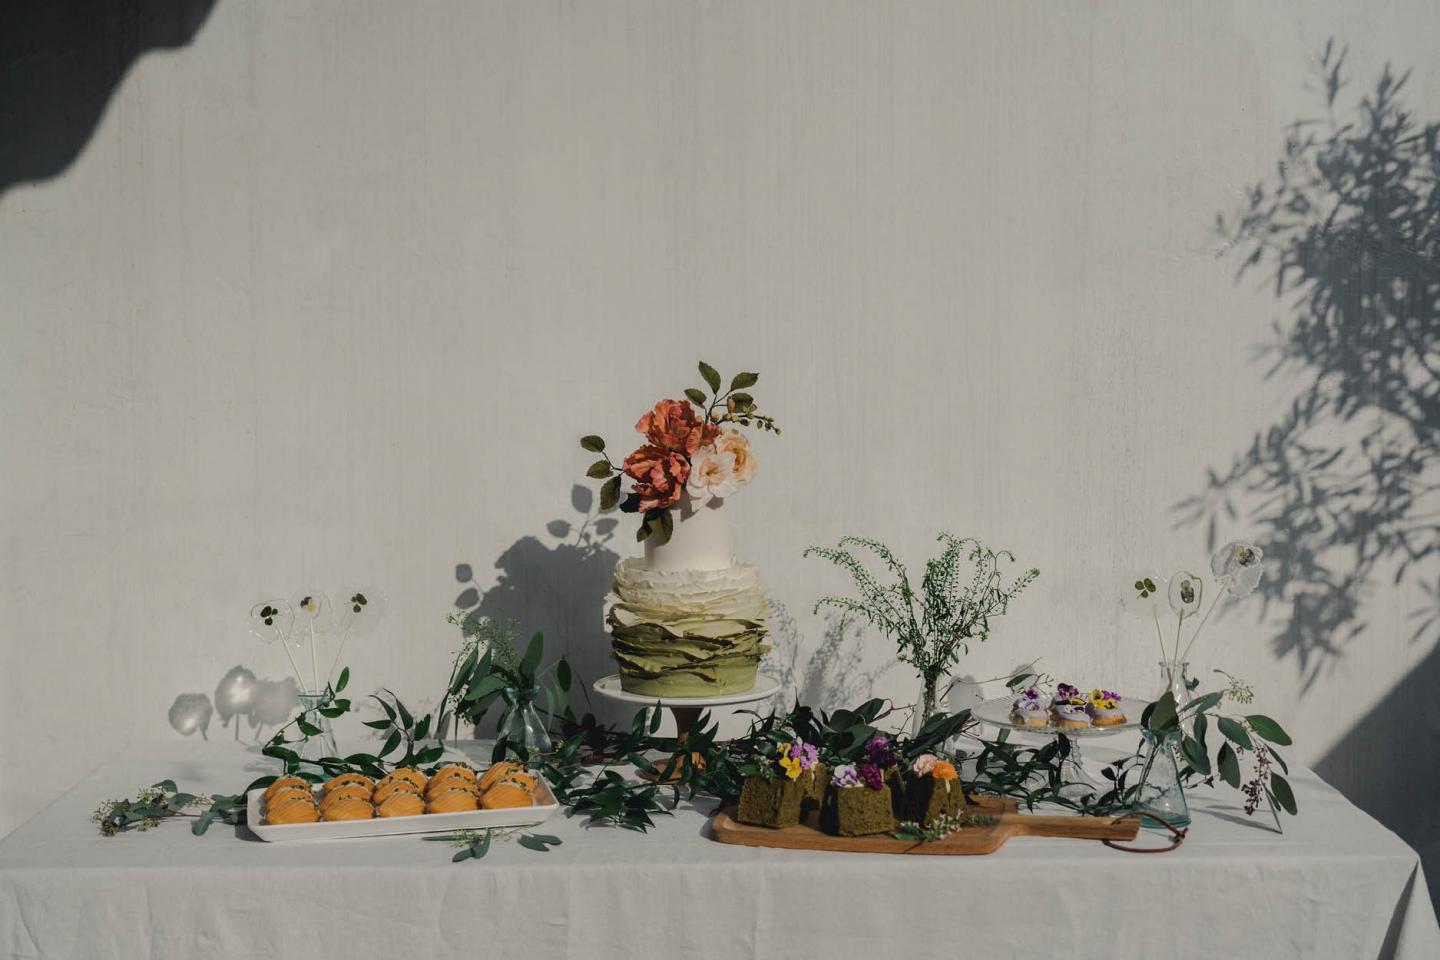 Venus meticulously curates a decadent feast complemented by a delicate floral arrangement from Sally Wong’s Oldsoul Florist in the spacious baking studio of Sheung Wan’s The Mixing Bowl